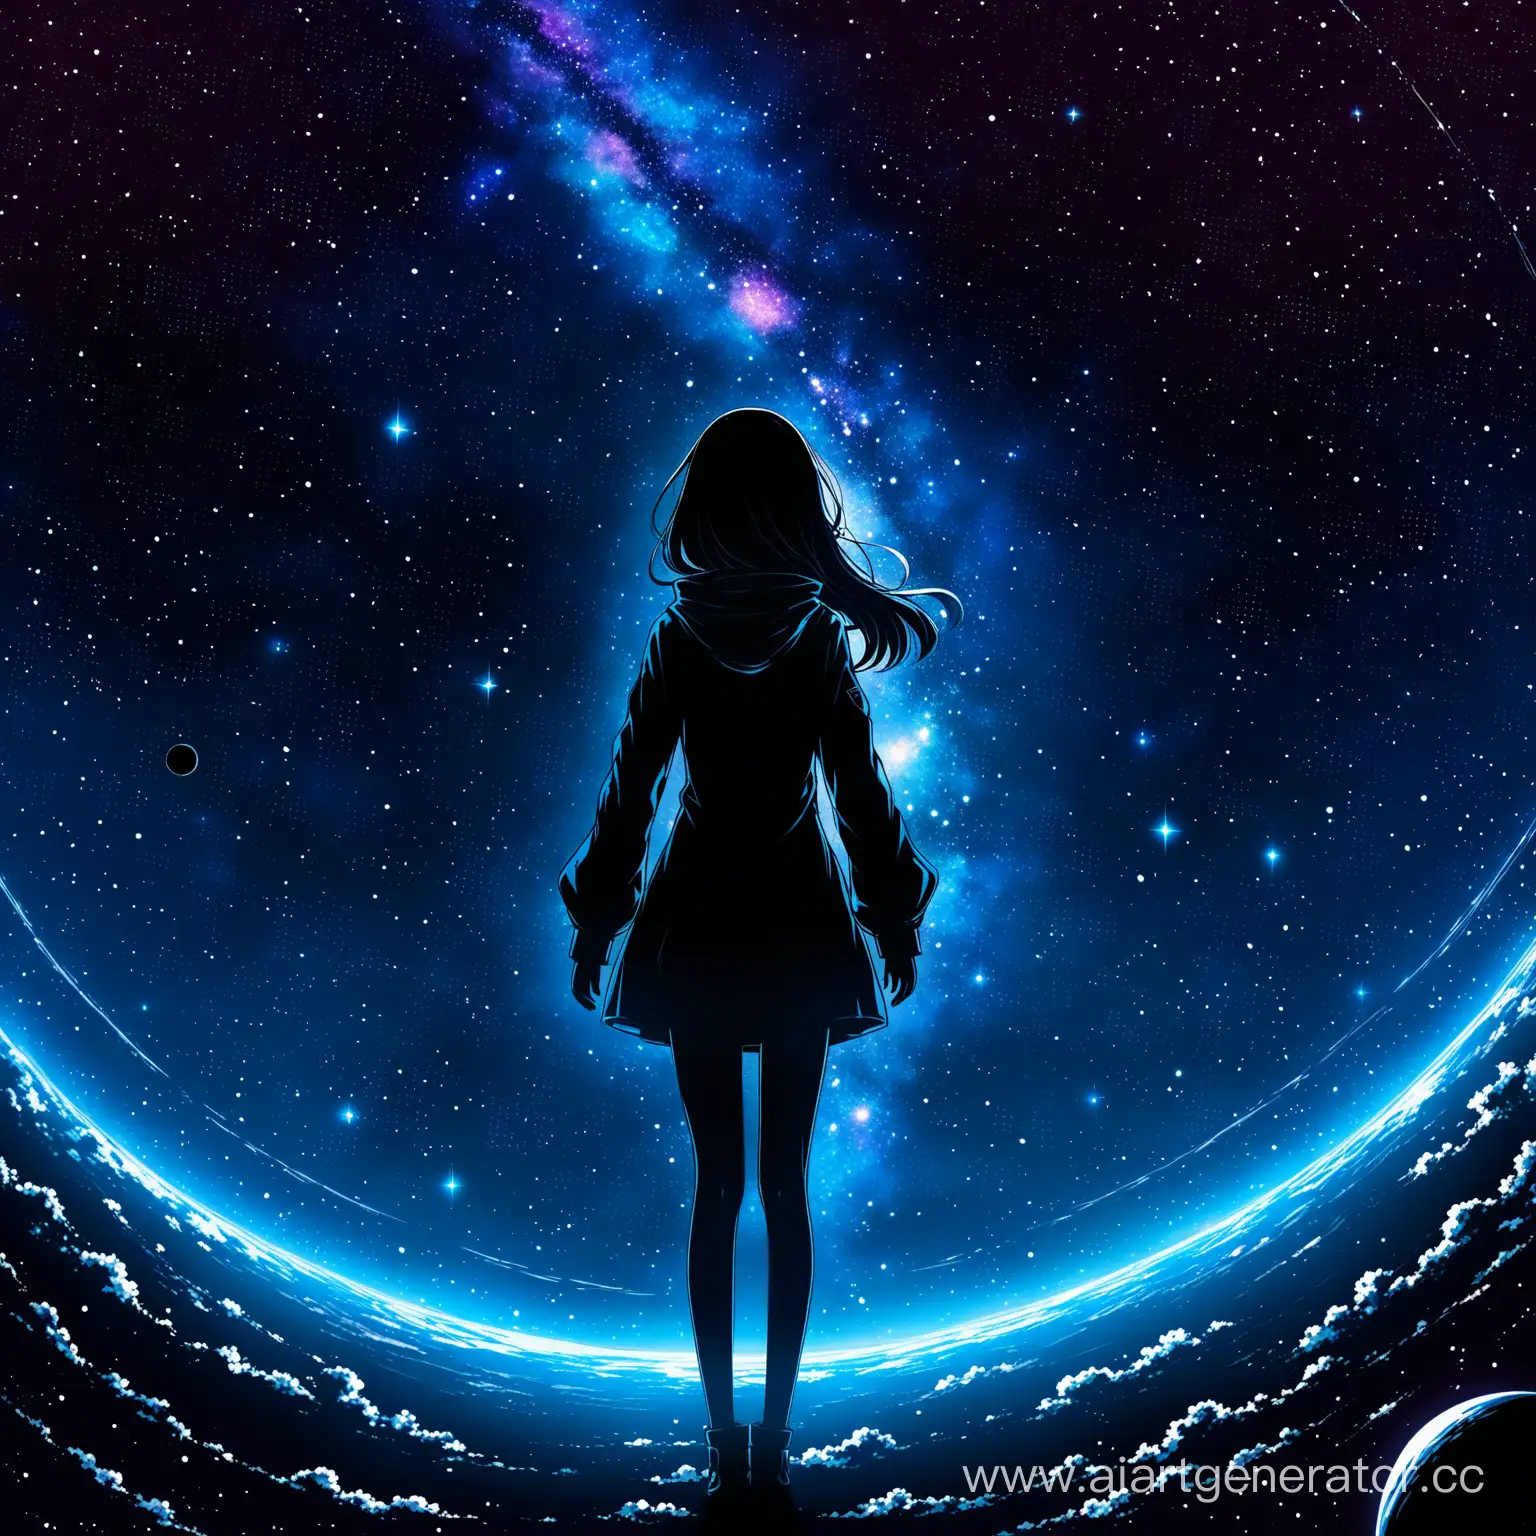 Enigmatic-Anime-Girl-Lost-in-Galactic-Abyss-Dark-Style-Artwork